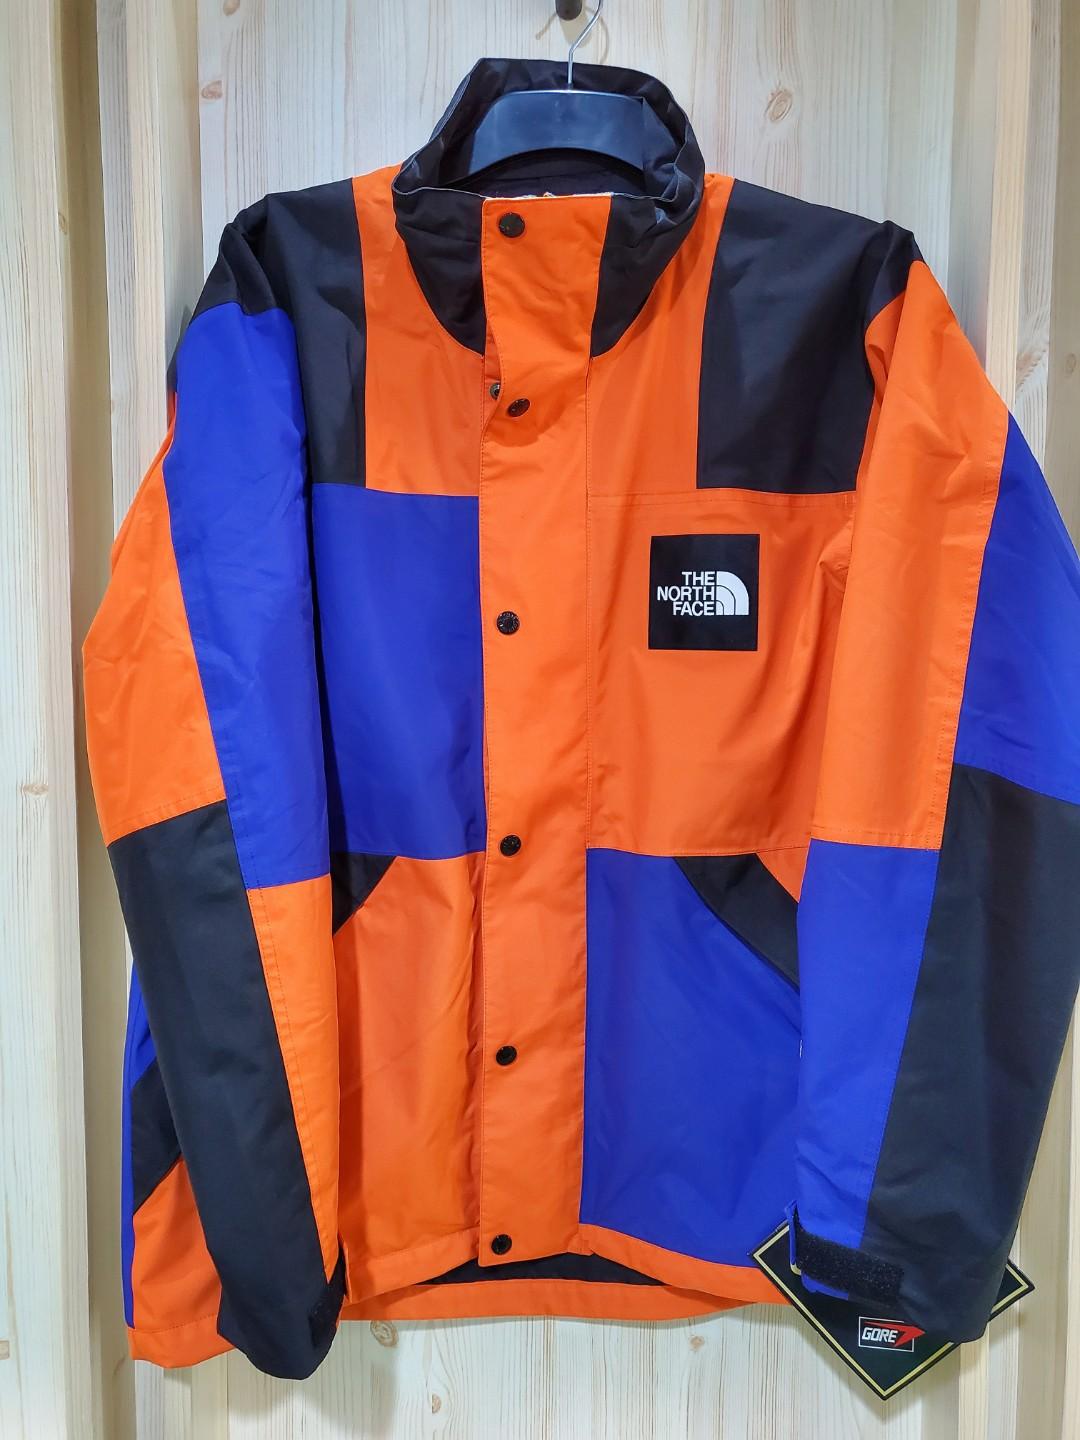 The north face L Shell 白 RAGE GTX Jacket